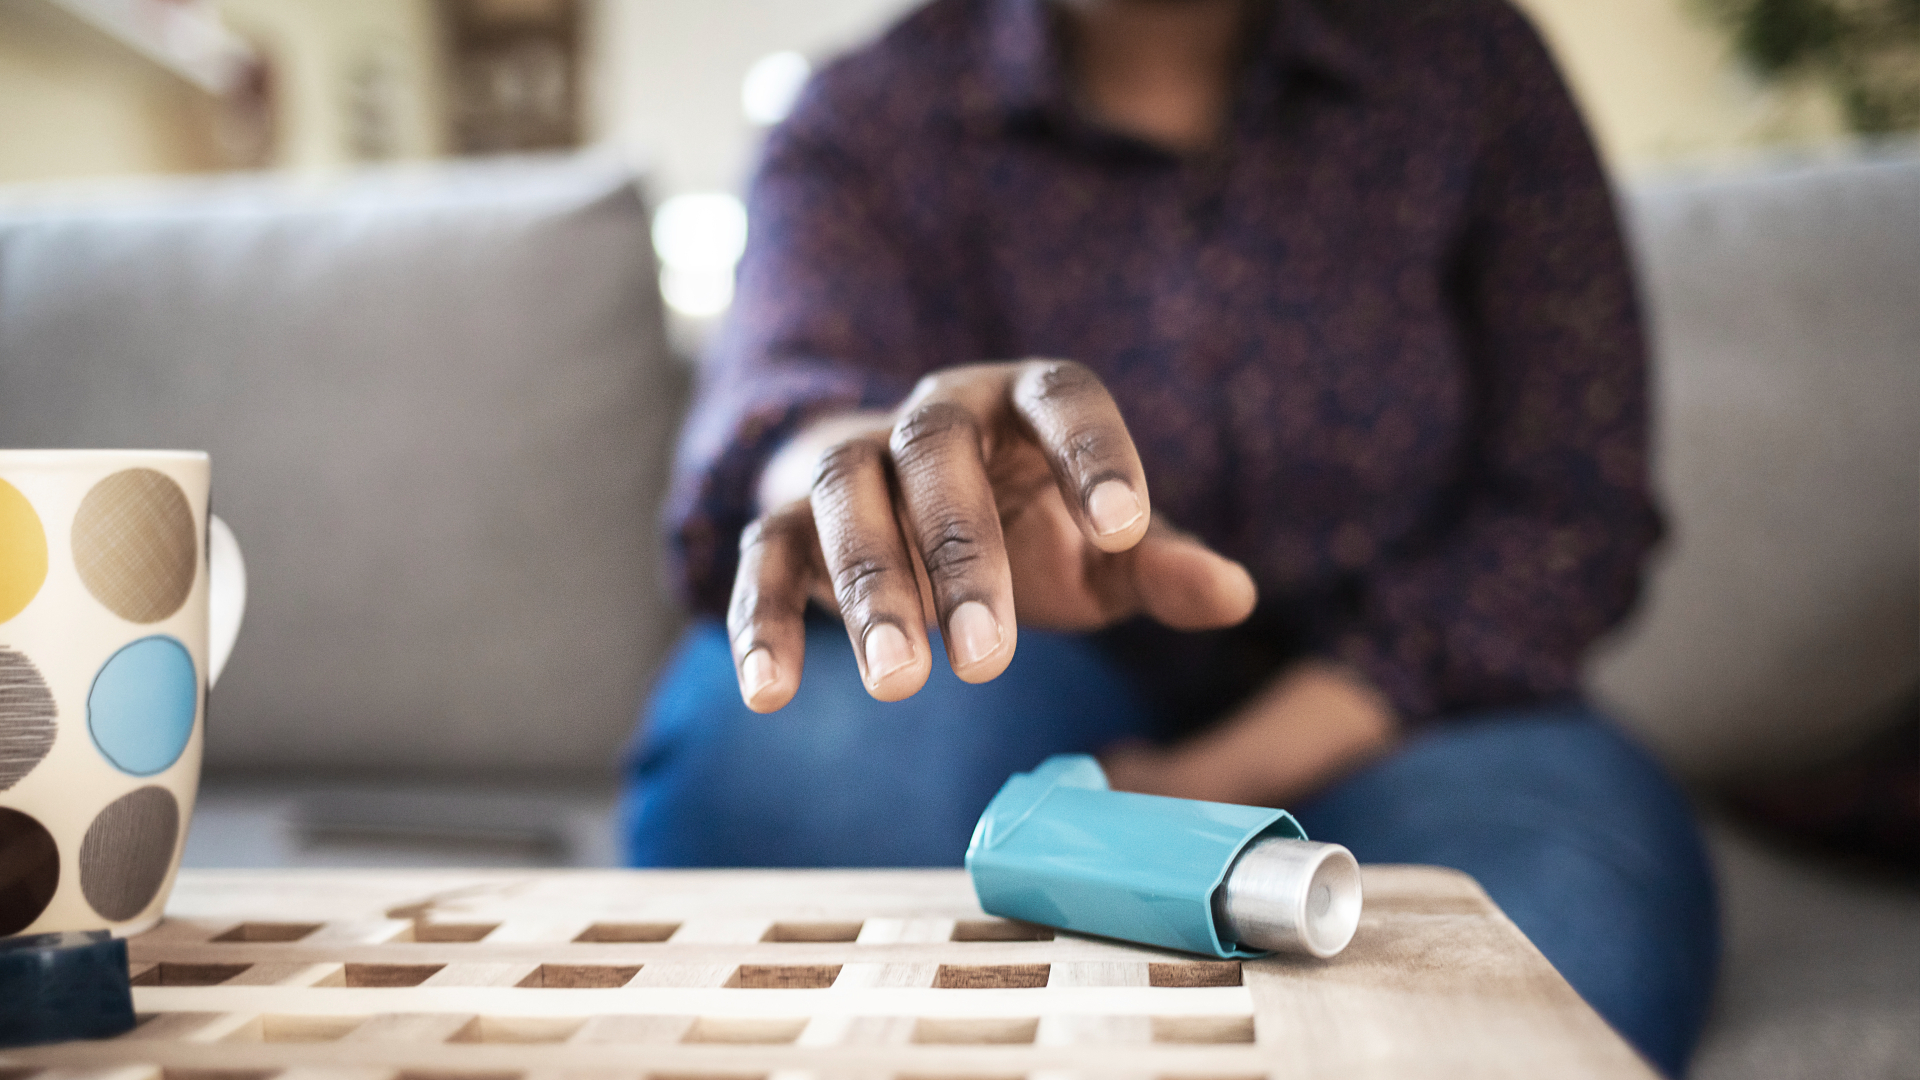 An African-American woman reaches for her inhaler on her coffee table